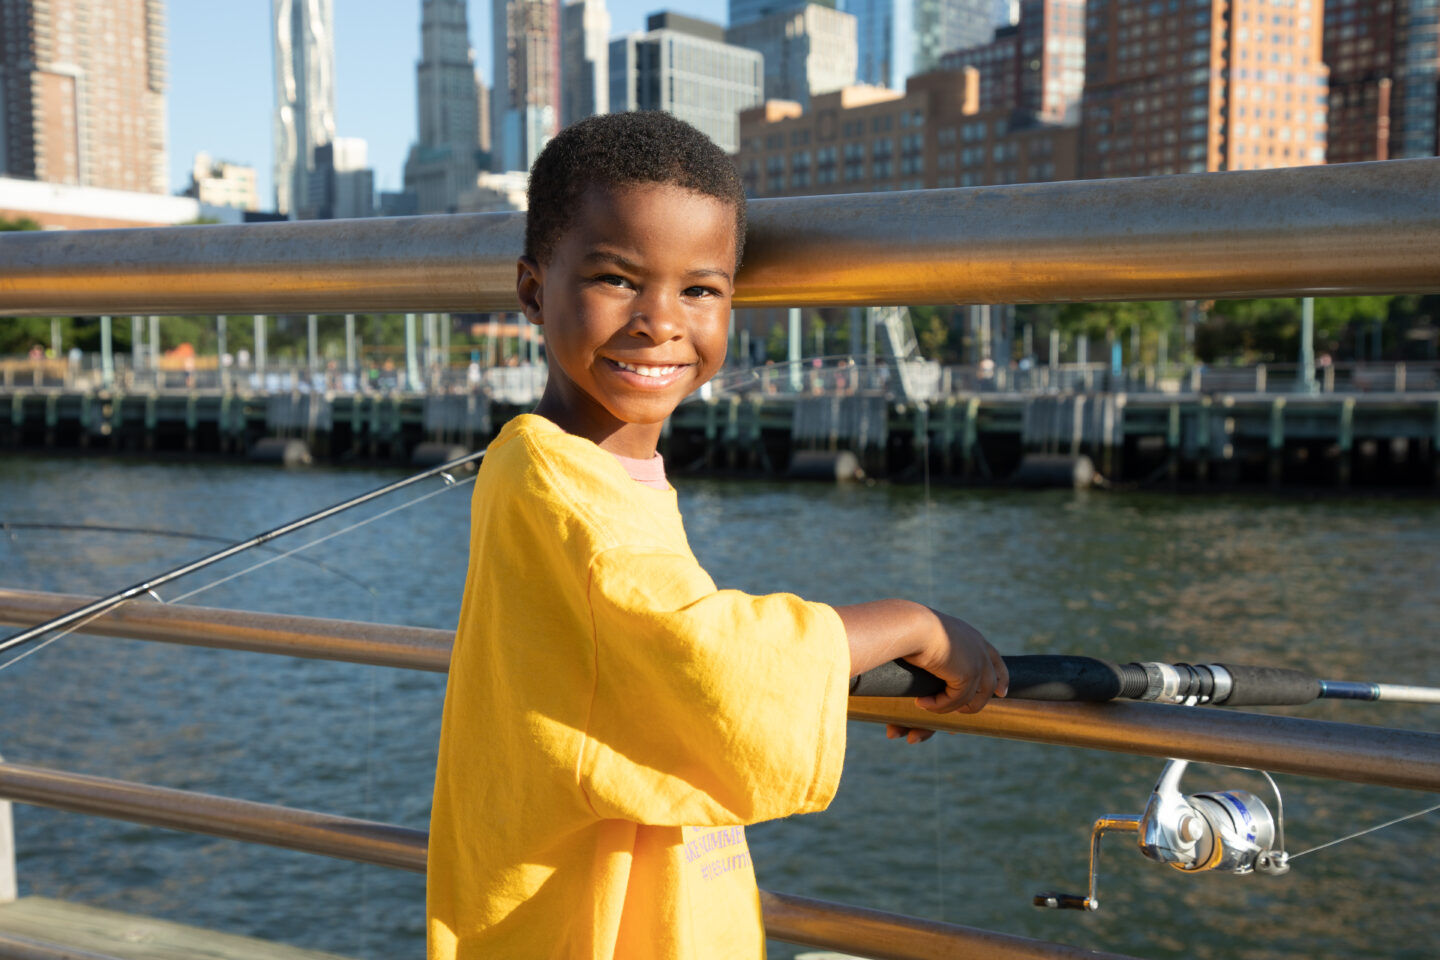 A child smiles after casting a line at Big City Fishing